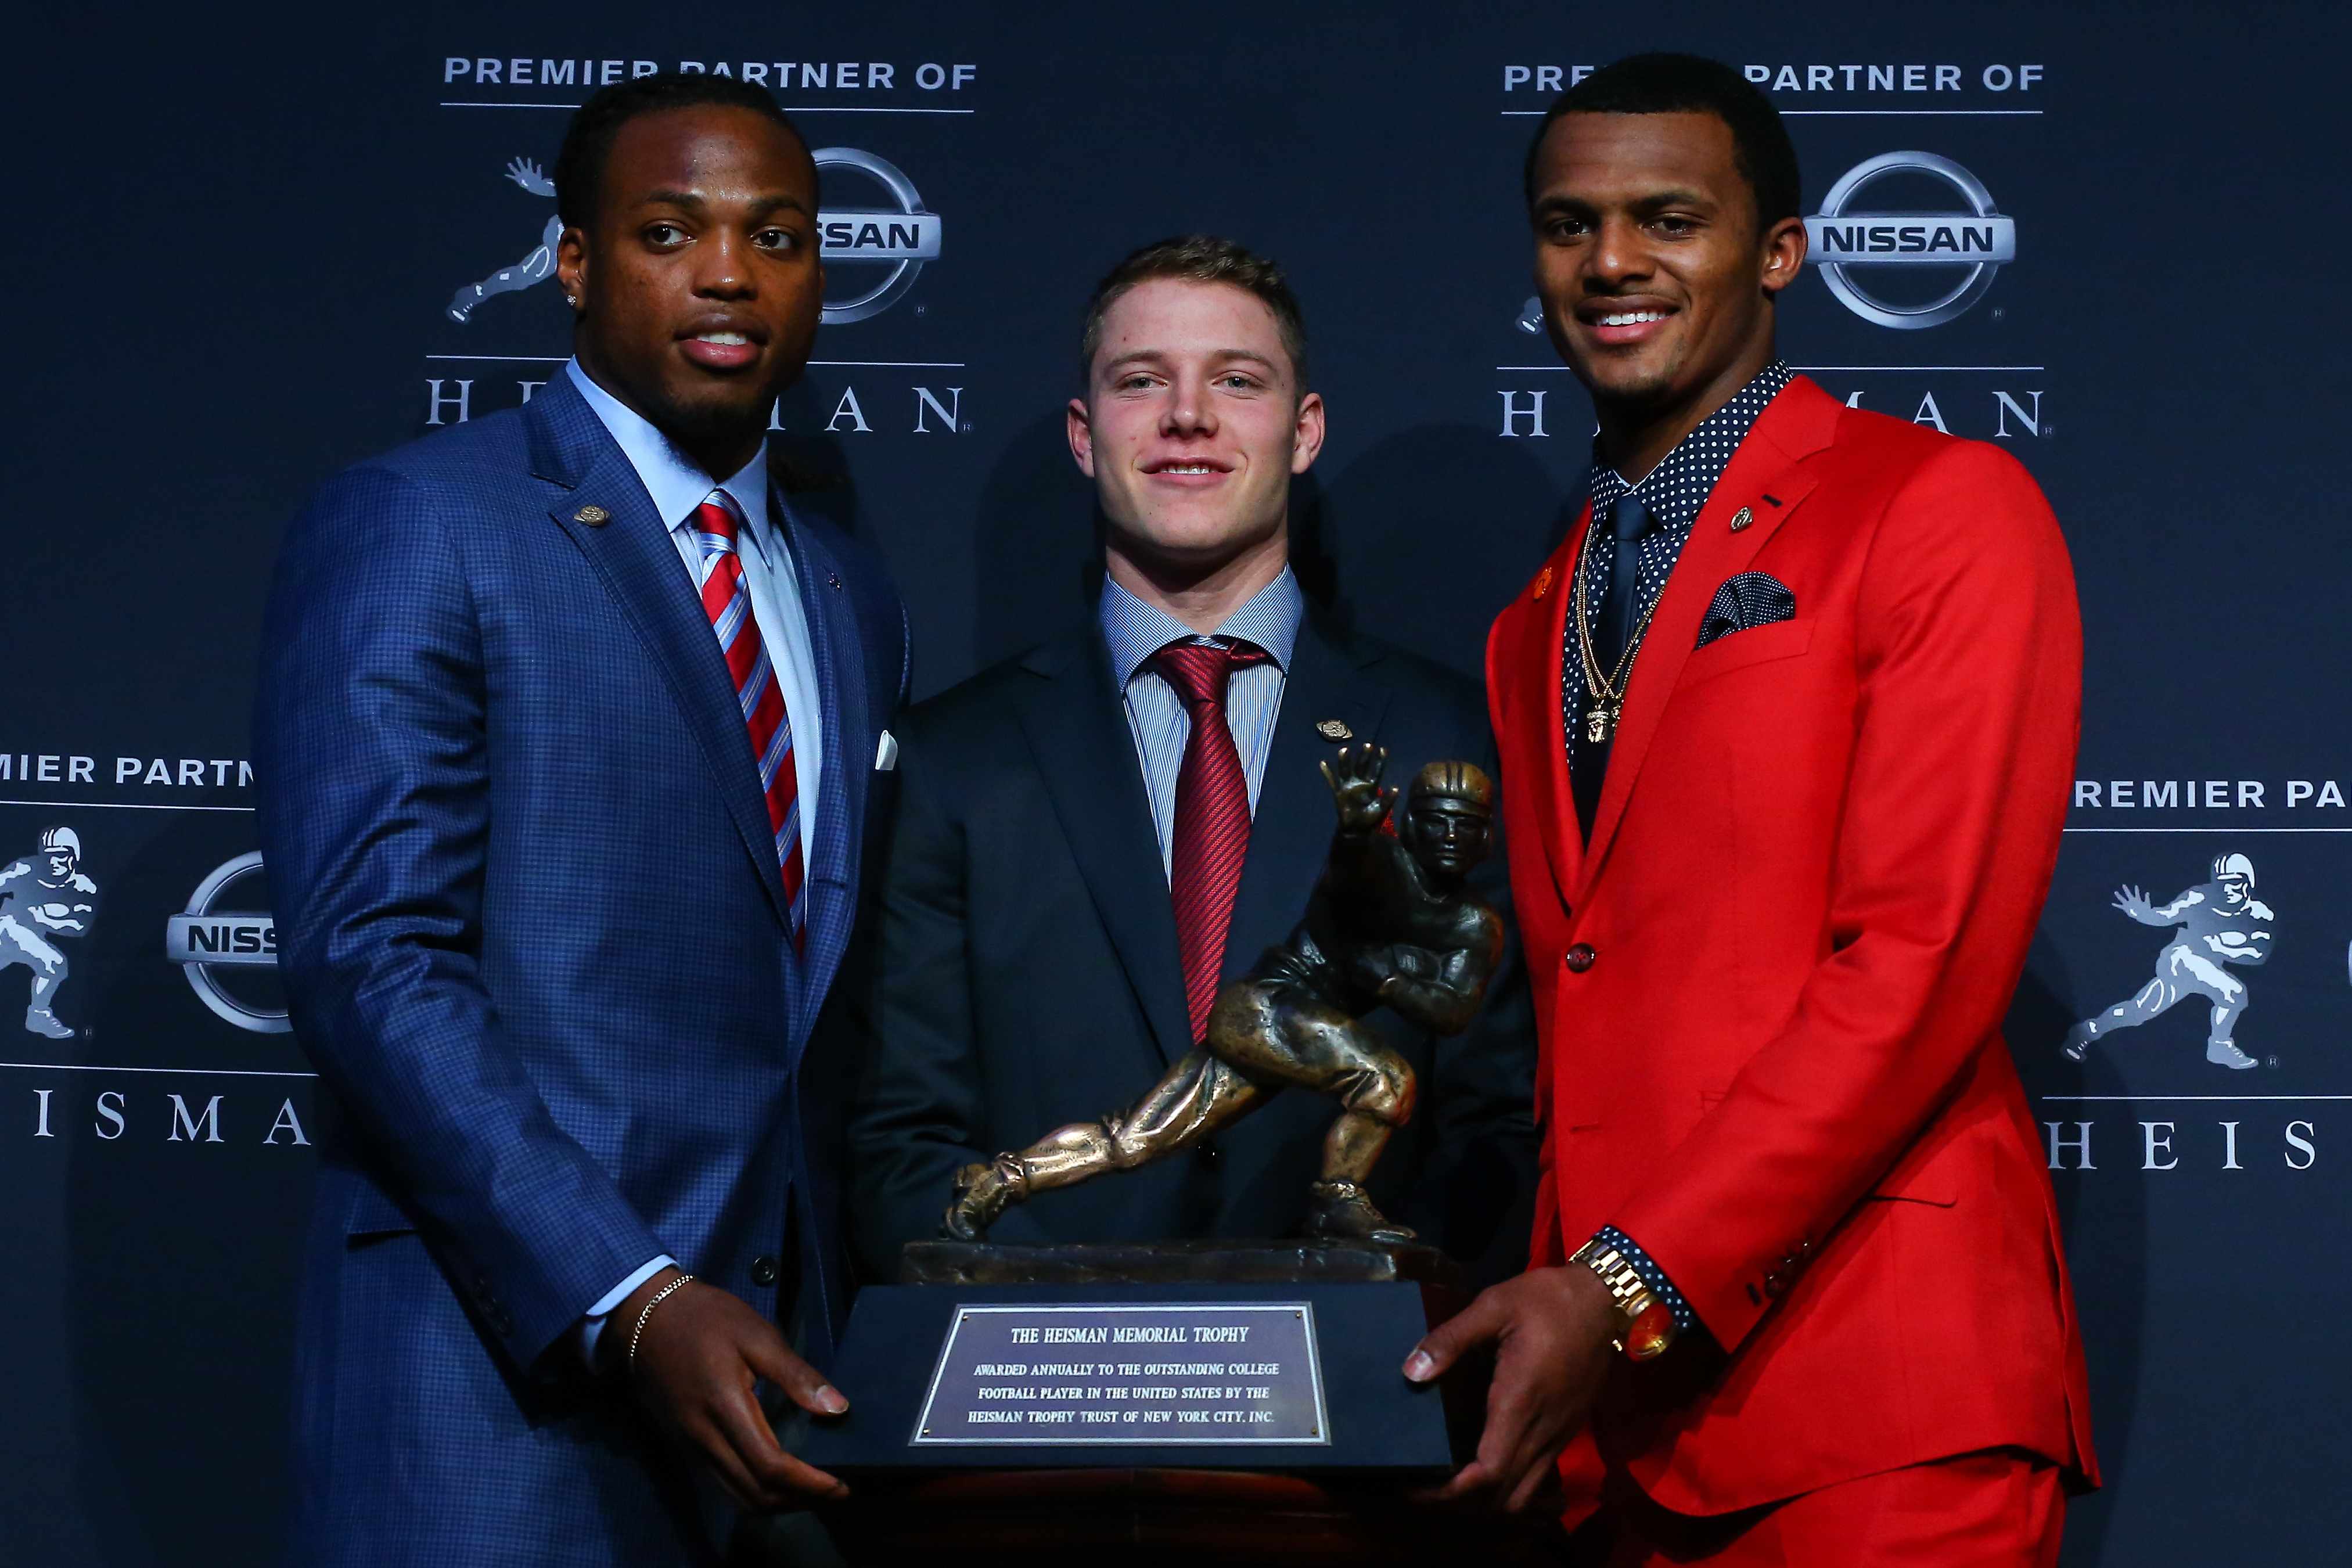 12 DEC 2015: University of Alabama running back Derrick Henry, Stanford University running back Christian McCaffrey, and Clemson University quarterback Deshaun Watson pose with the Heisman Trophy at a press conference prior to the 81st Annual Heisman award ceremony in New York City. (Photo by Rich Graessle/Icon Sportswire) 